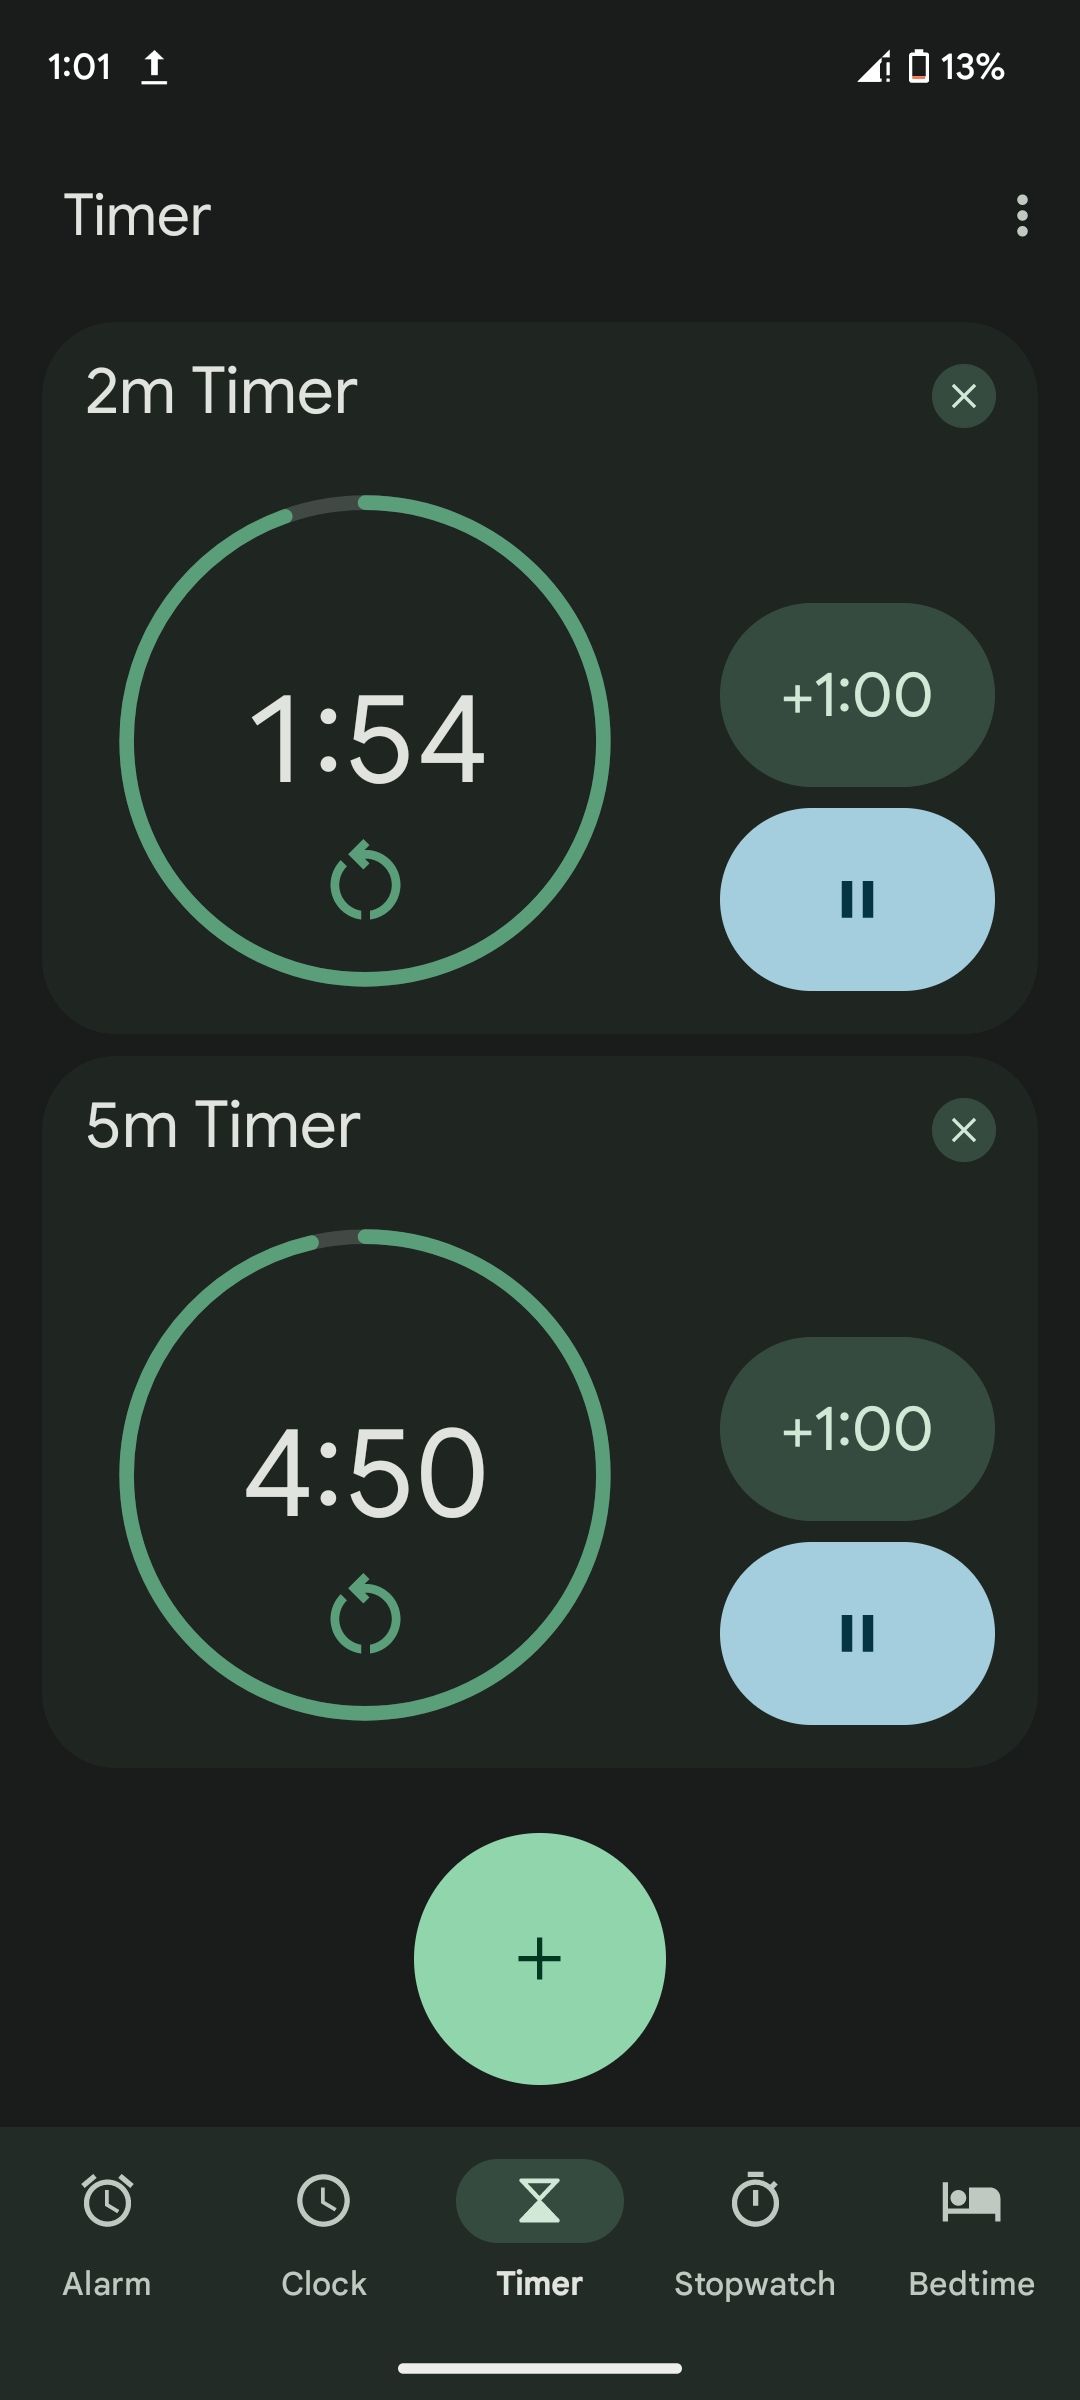 Concurrent timers running in Google's Clock app